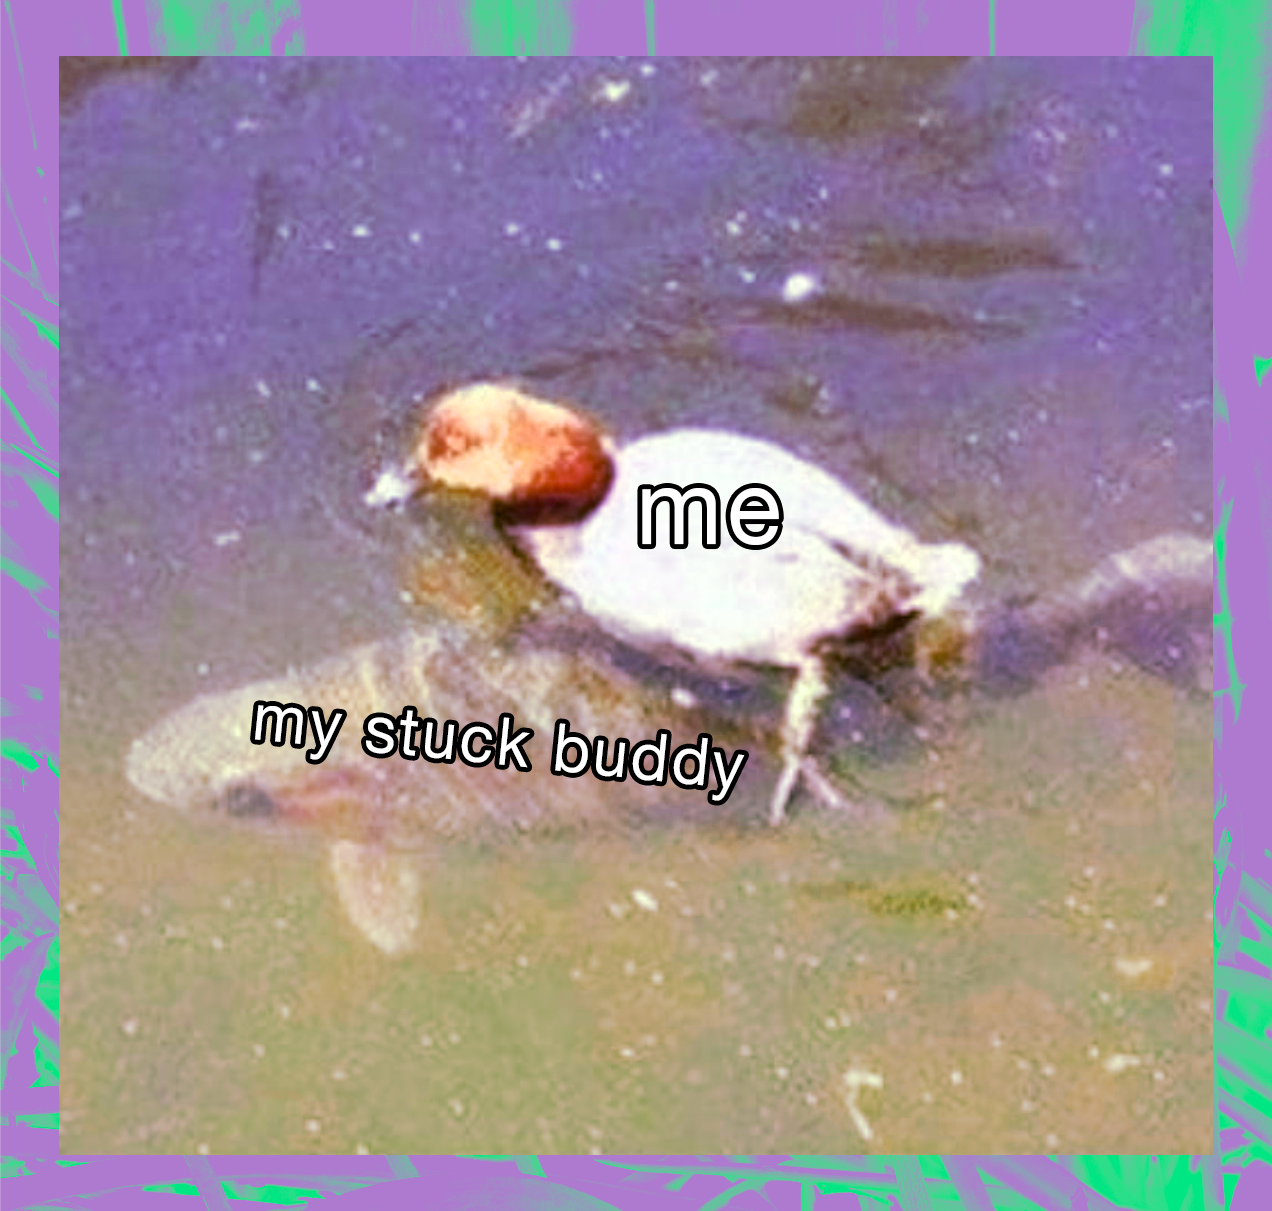 a meme of a duck riding a fish. the duck is labelled "me" and the fish is labelled "my stuck buddy"